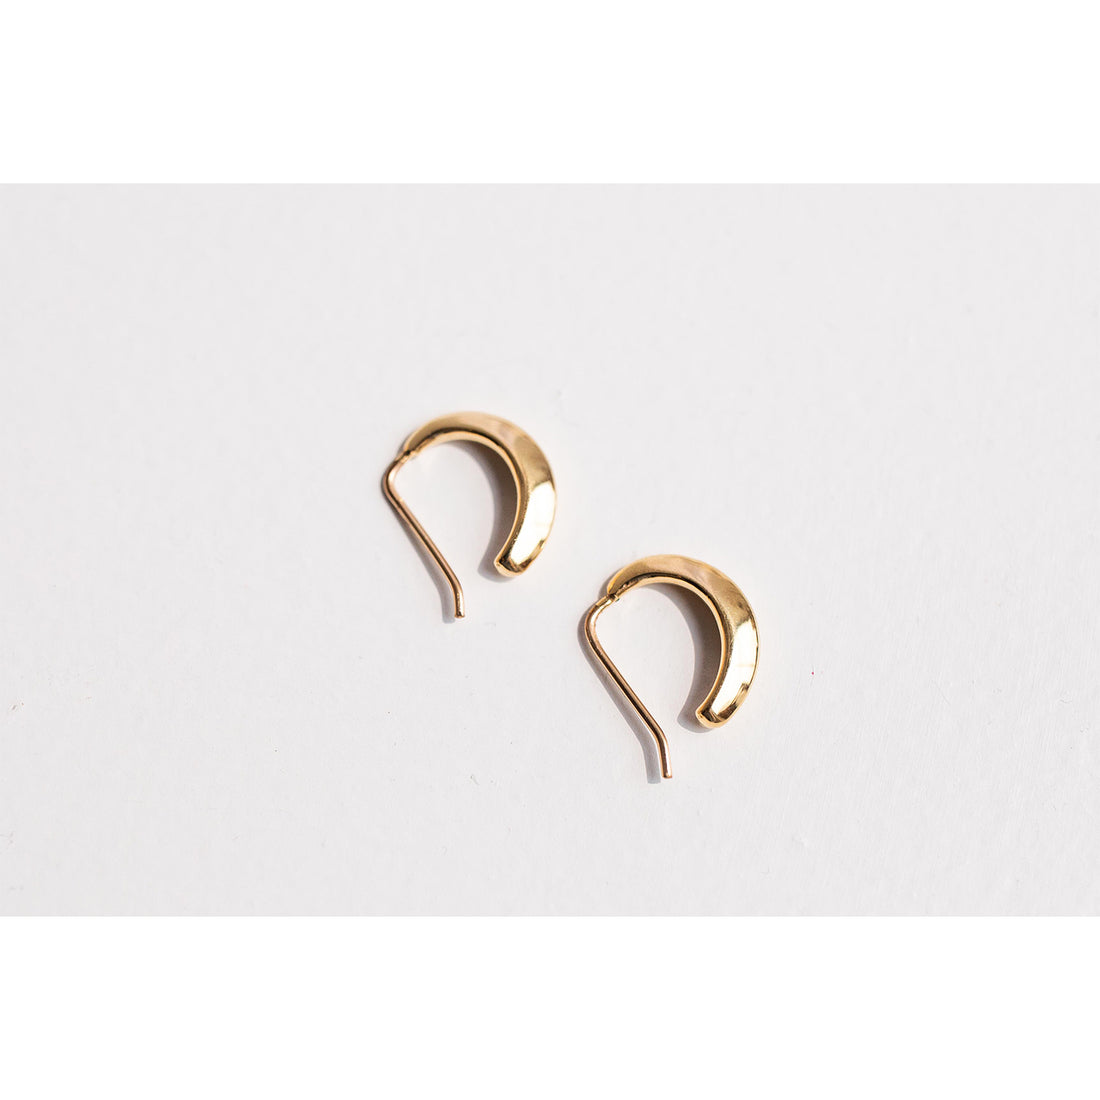 Fay Andrada Selka Petite Hoops in Gold Plated Brass